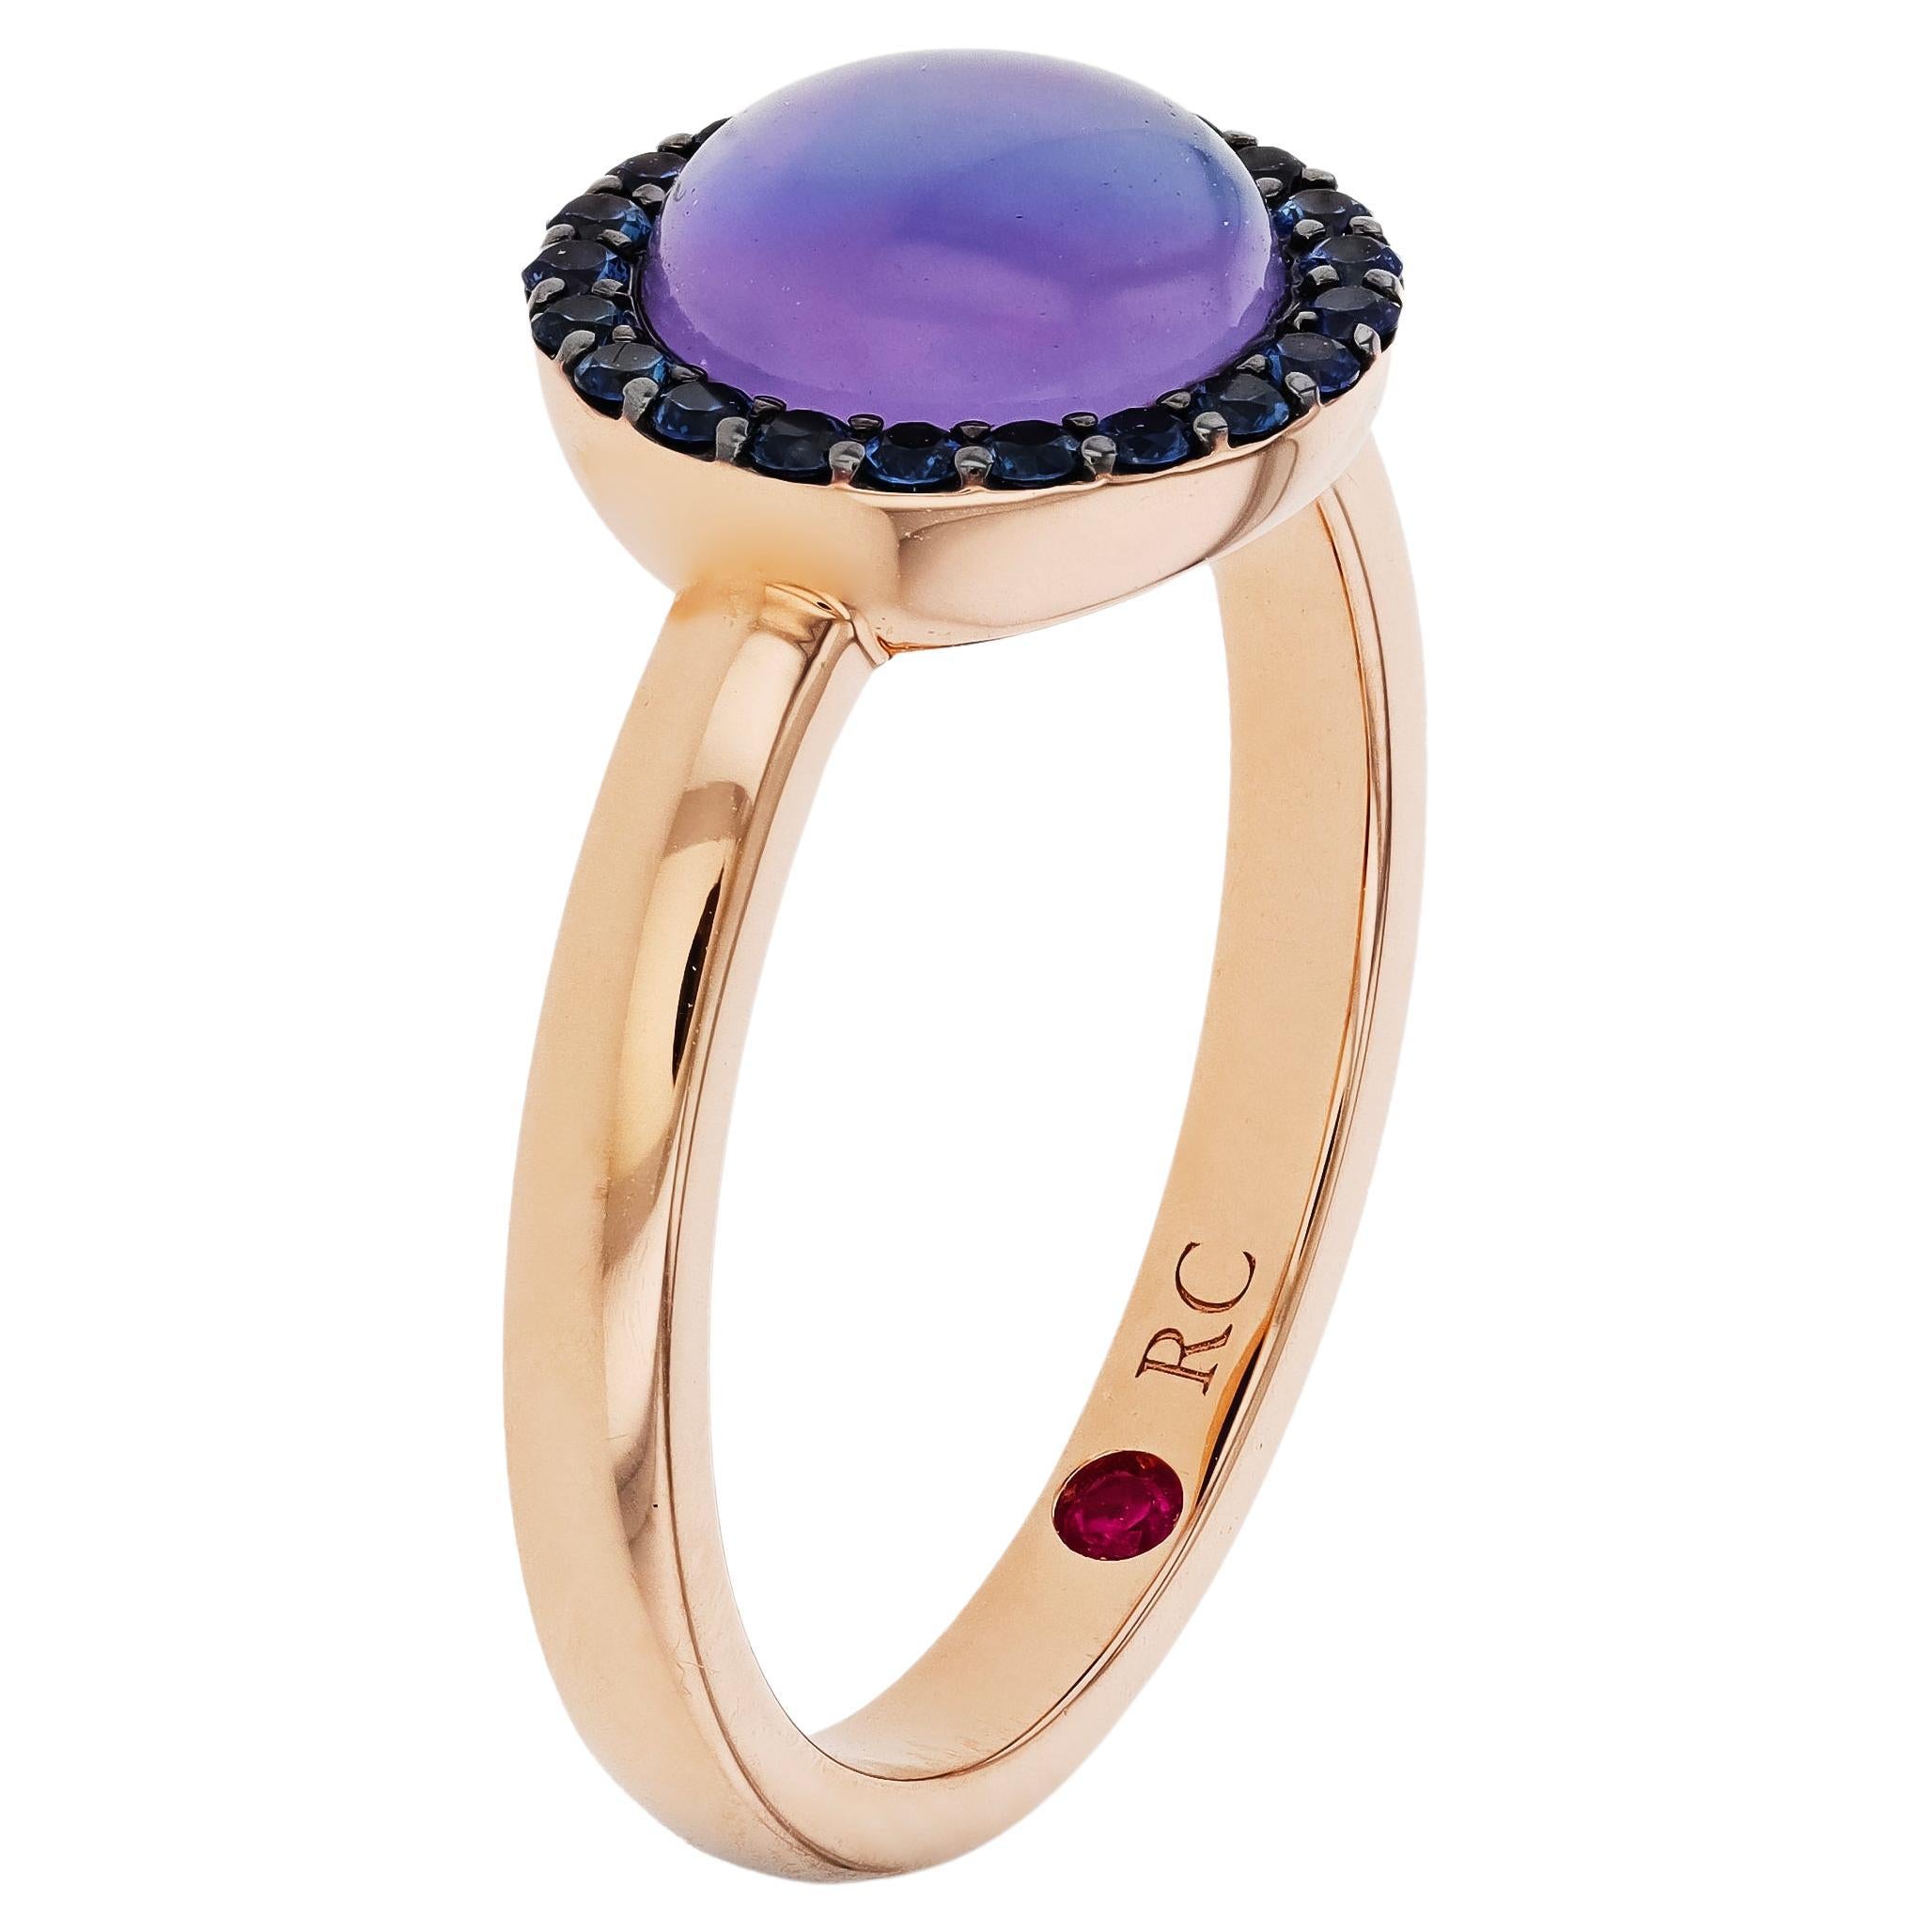 Roberto Coin 18K Rose Gold, Agate & Sapphire Statement Ring sz 6.5 For Sale